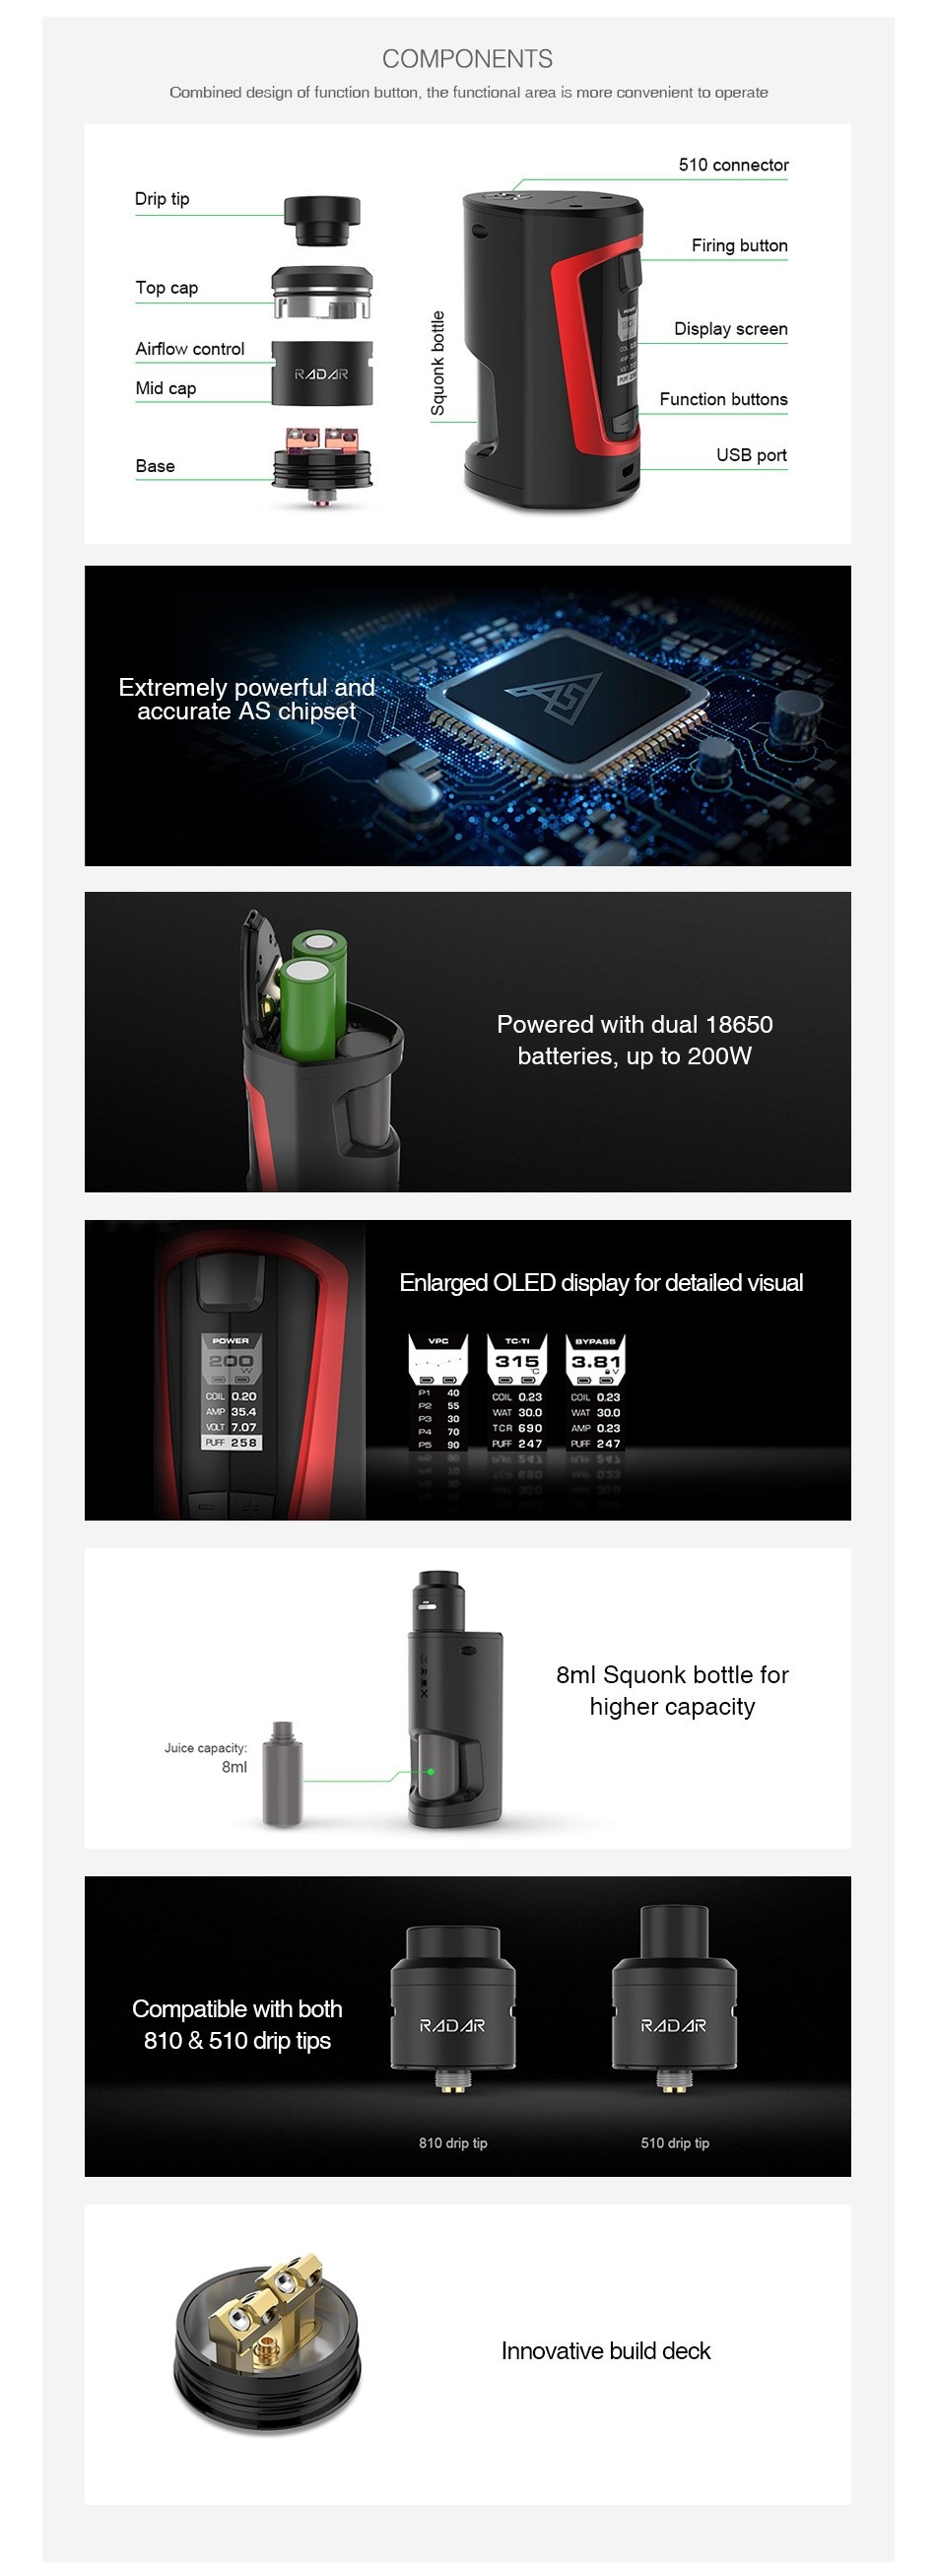 GeekVape GBOX Squonker 200W TC Kit with Radar RDA COMPONENTS Combined design ot tunction button  the functional area is more convenient to operate 510 connect Drip tip Firing button Display screen Airow ccntrol Function buttons  ase USB port EXtremely powerful ani accurate chipset  1 Powered with dual 18650 batteries  up to 200W Enlarged oled display for detailed visual    8ml squonk bottle for higher capacity Juice capacity  Compatible with both 10  510 drip tips Innovative build deck